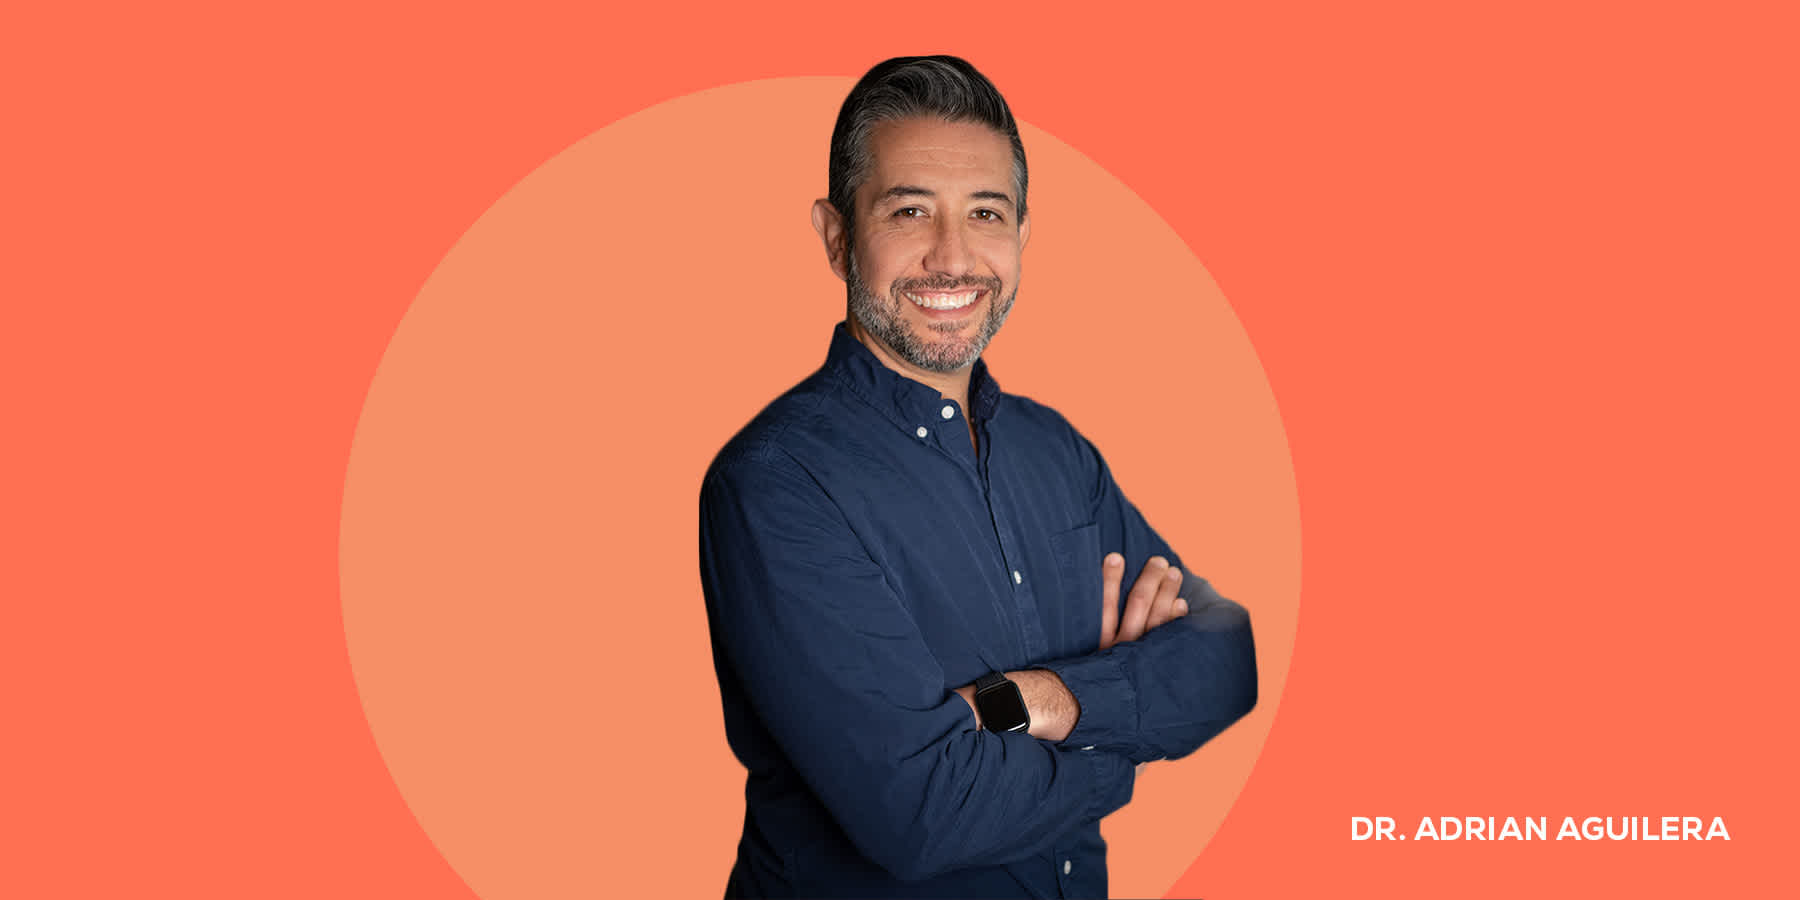 Picture of Dr. Adrian Aguilera against an orange background